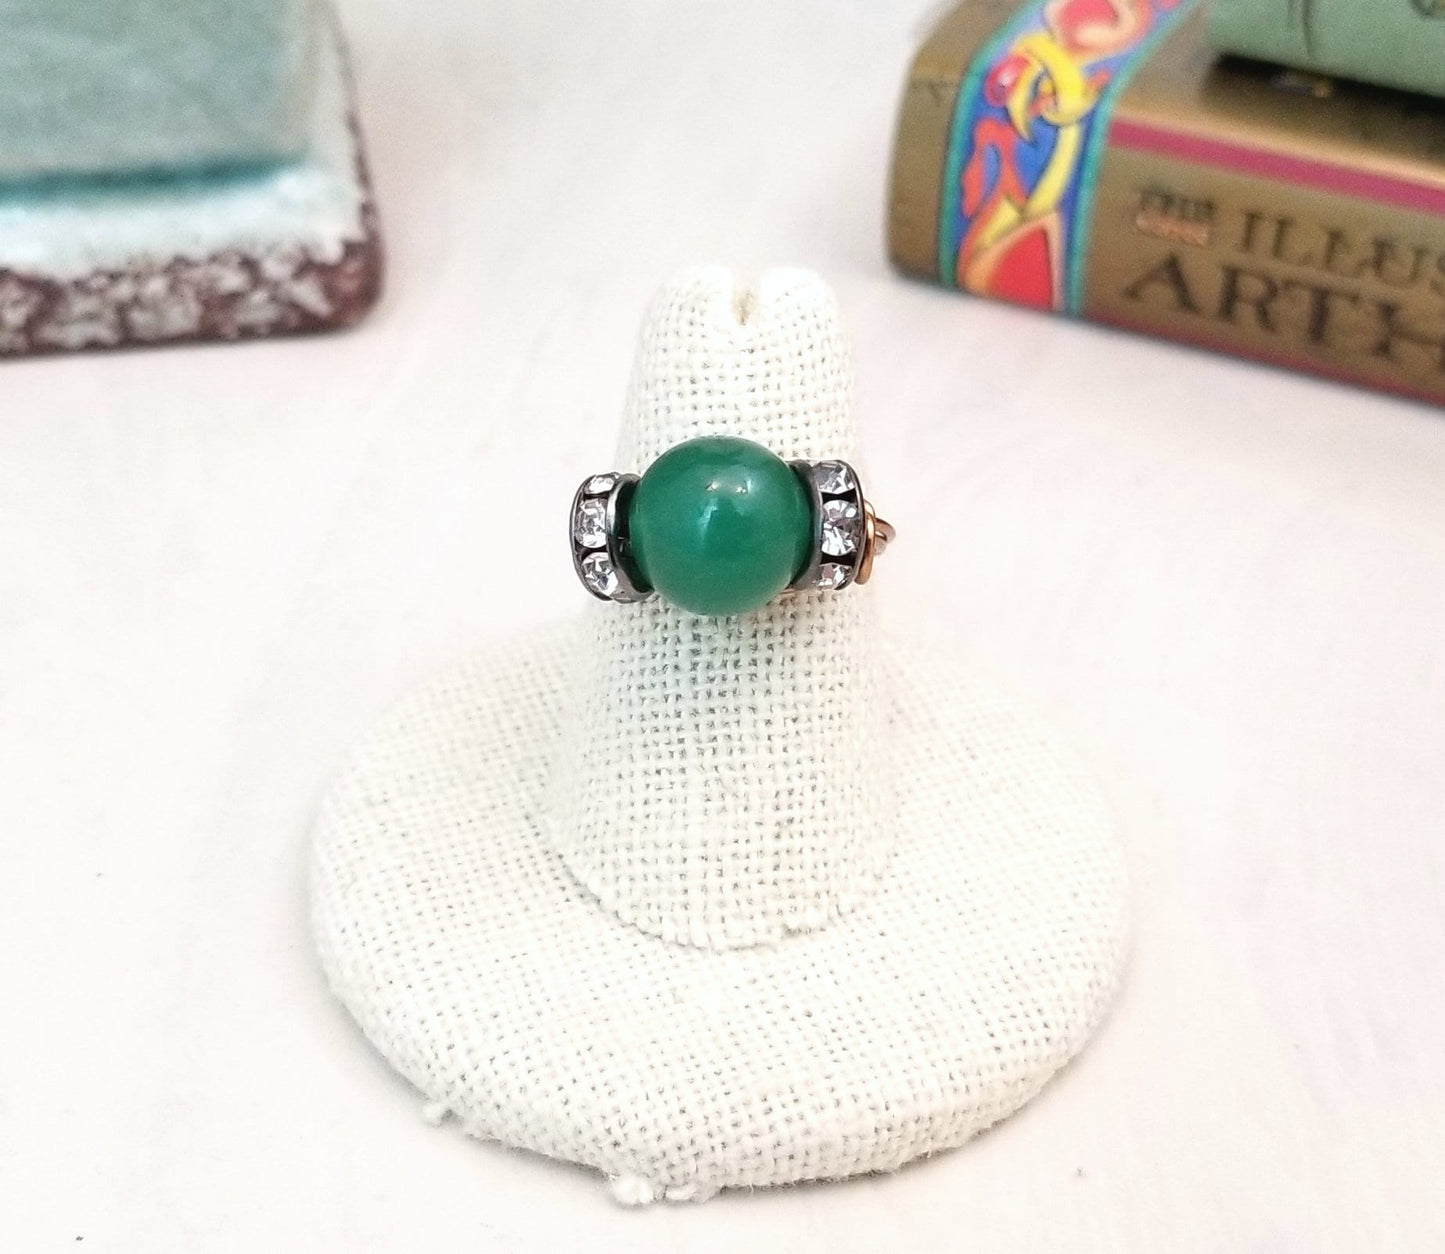 Wire Ring in Green Jade with Rhinestones, Fairy Tale, Renaissance, Medieval, Choice of Colors and Metals